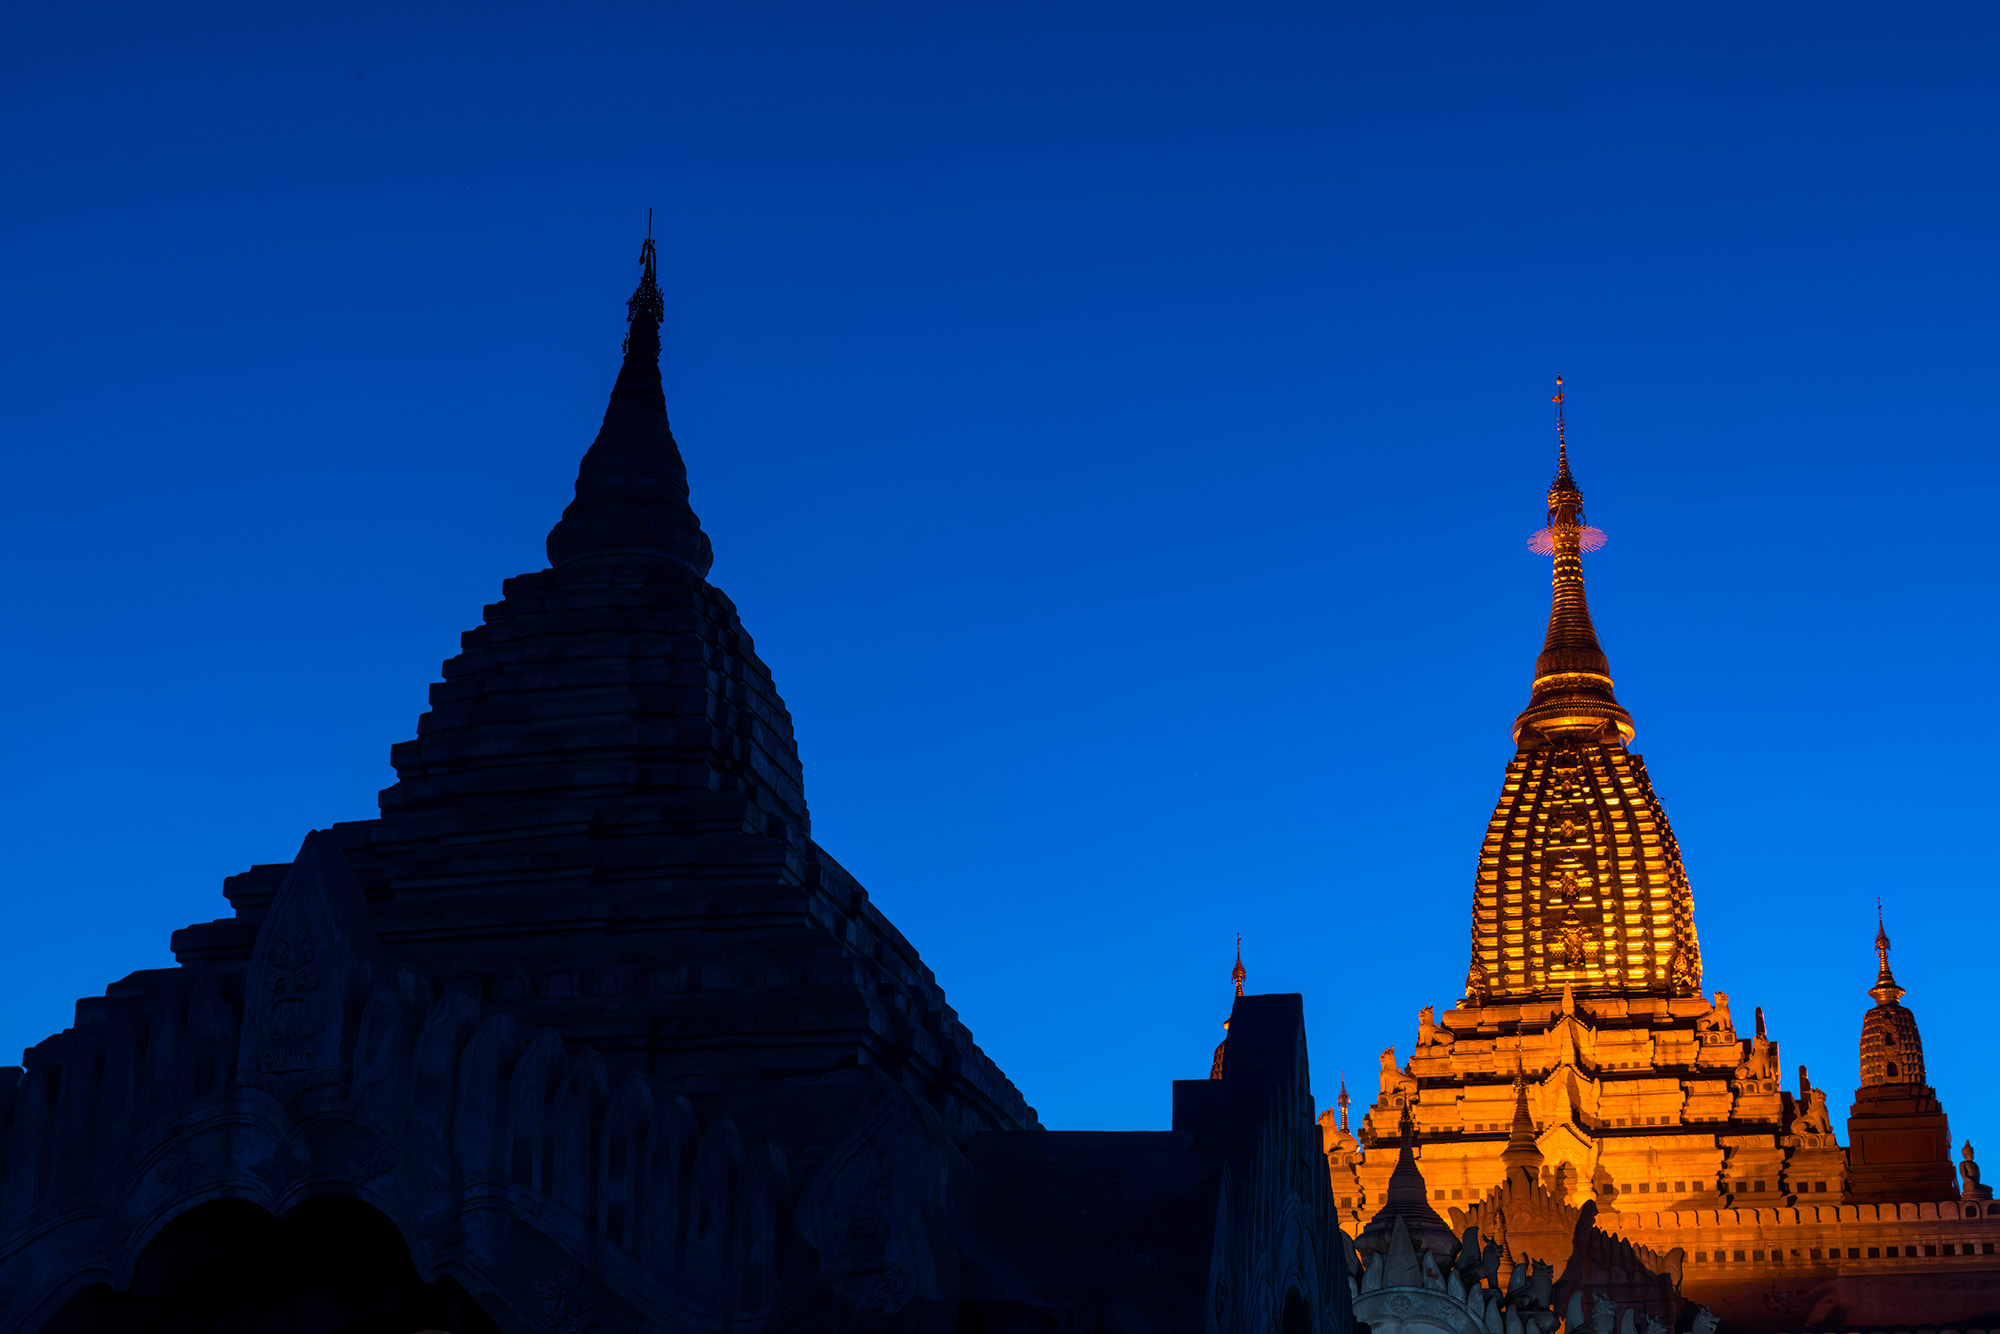 As twilight descends upon the ancient land of Bagan, Myanmar, Ananda Temple emerges as a radiant gem. Its illuminated façade...